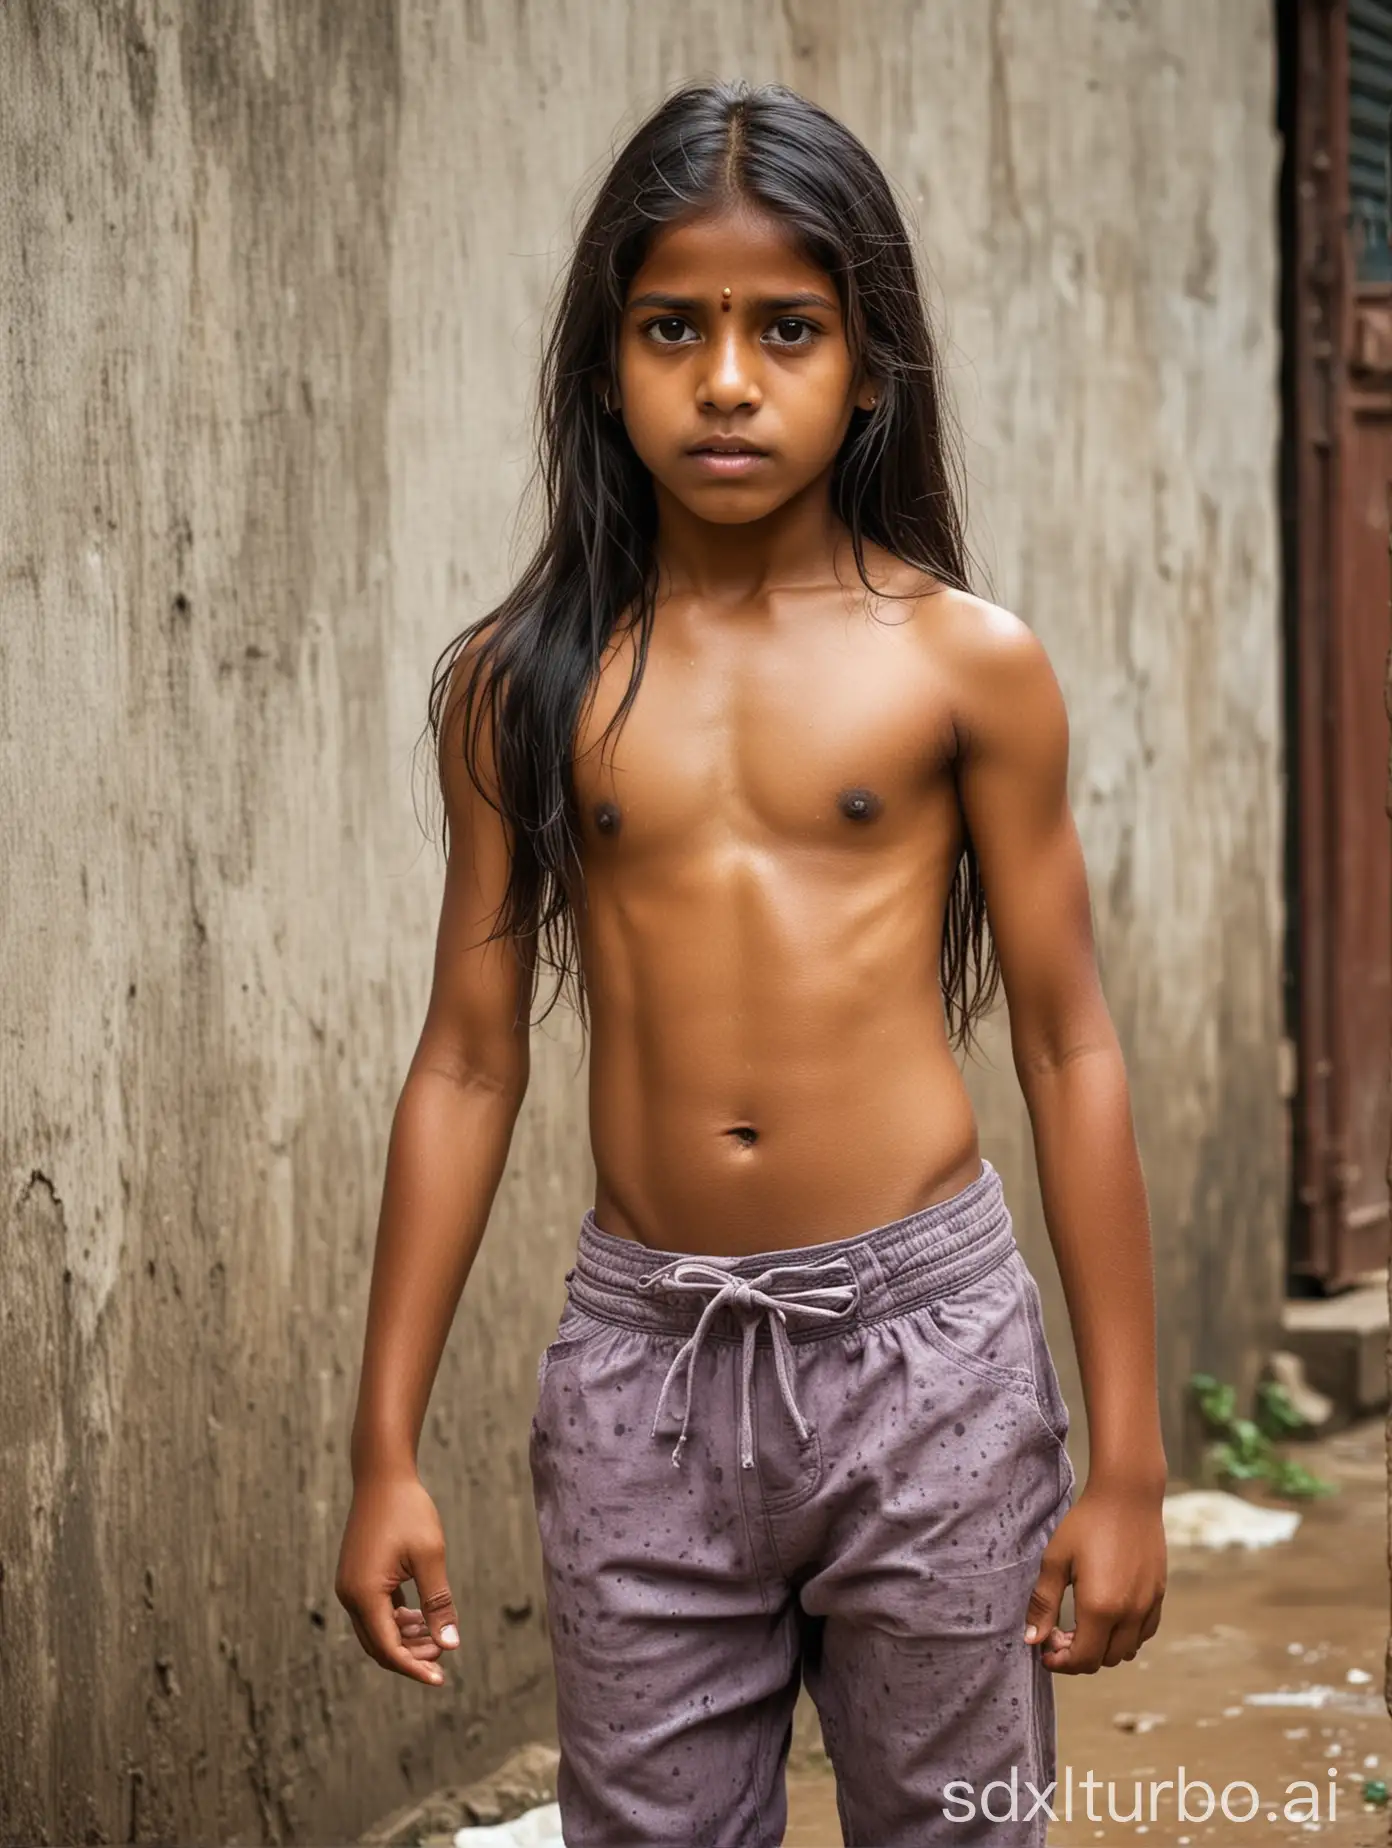 Indian-Girl-with-Muscular-Abs-Showing-Belly-in-Rainy-Poor-Neighborhood